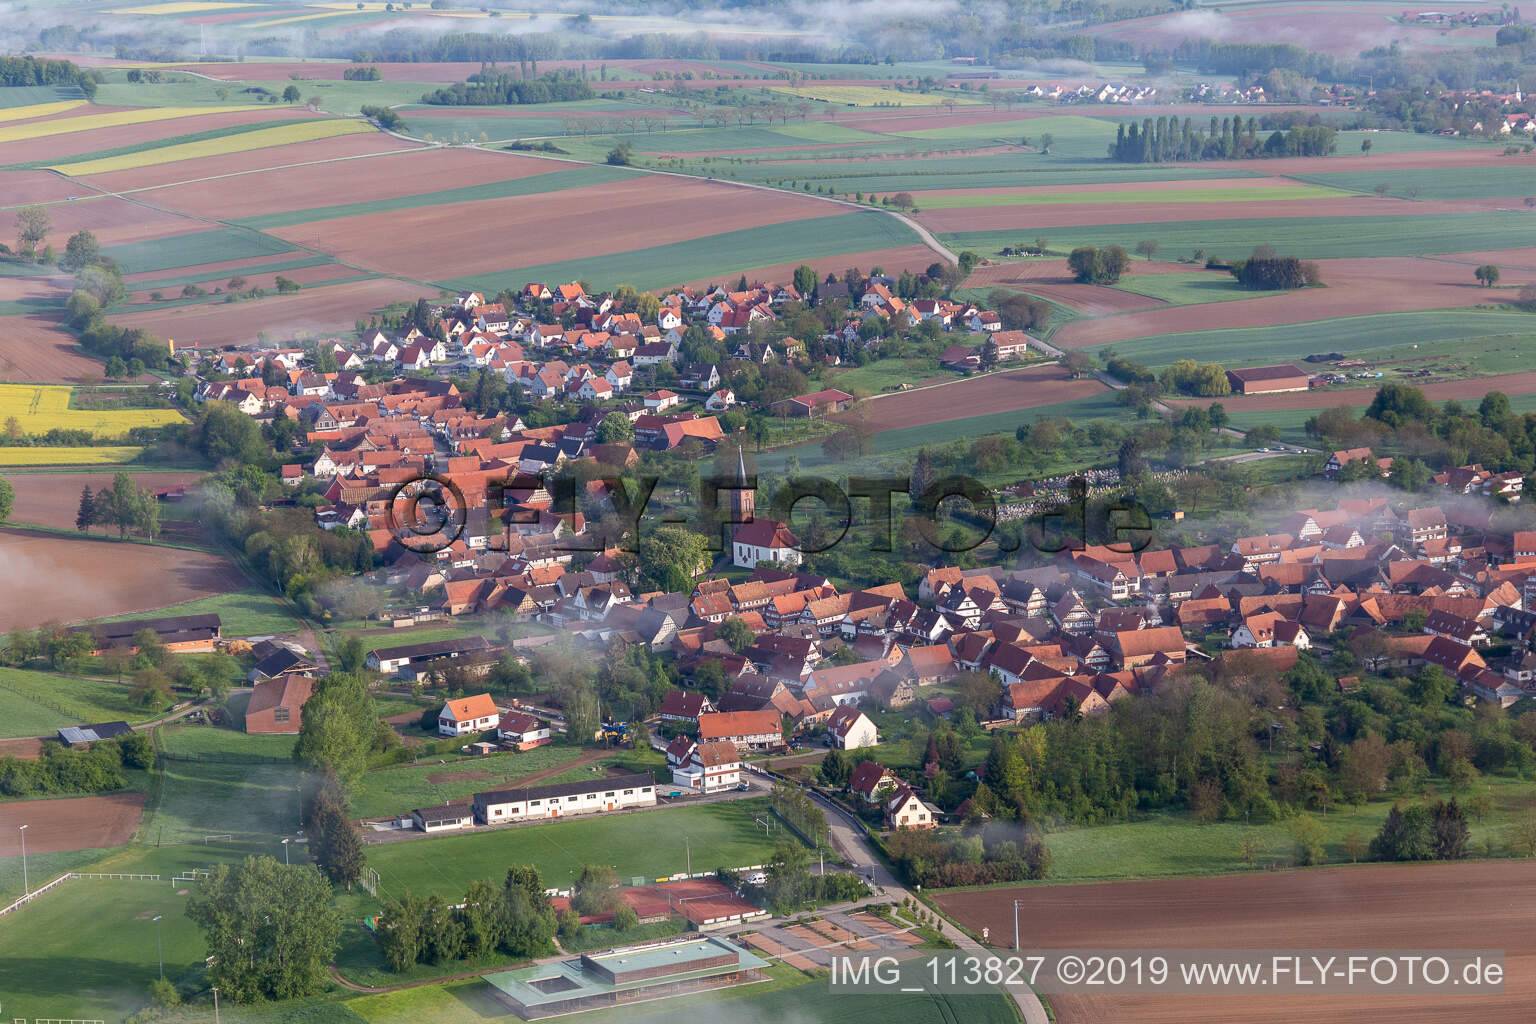 Drone image of Hunspach in the state Bas-Rhin, France